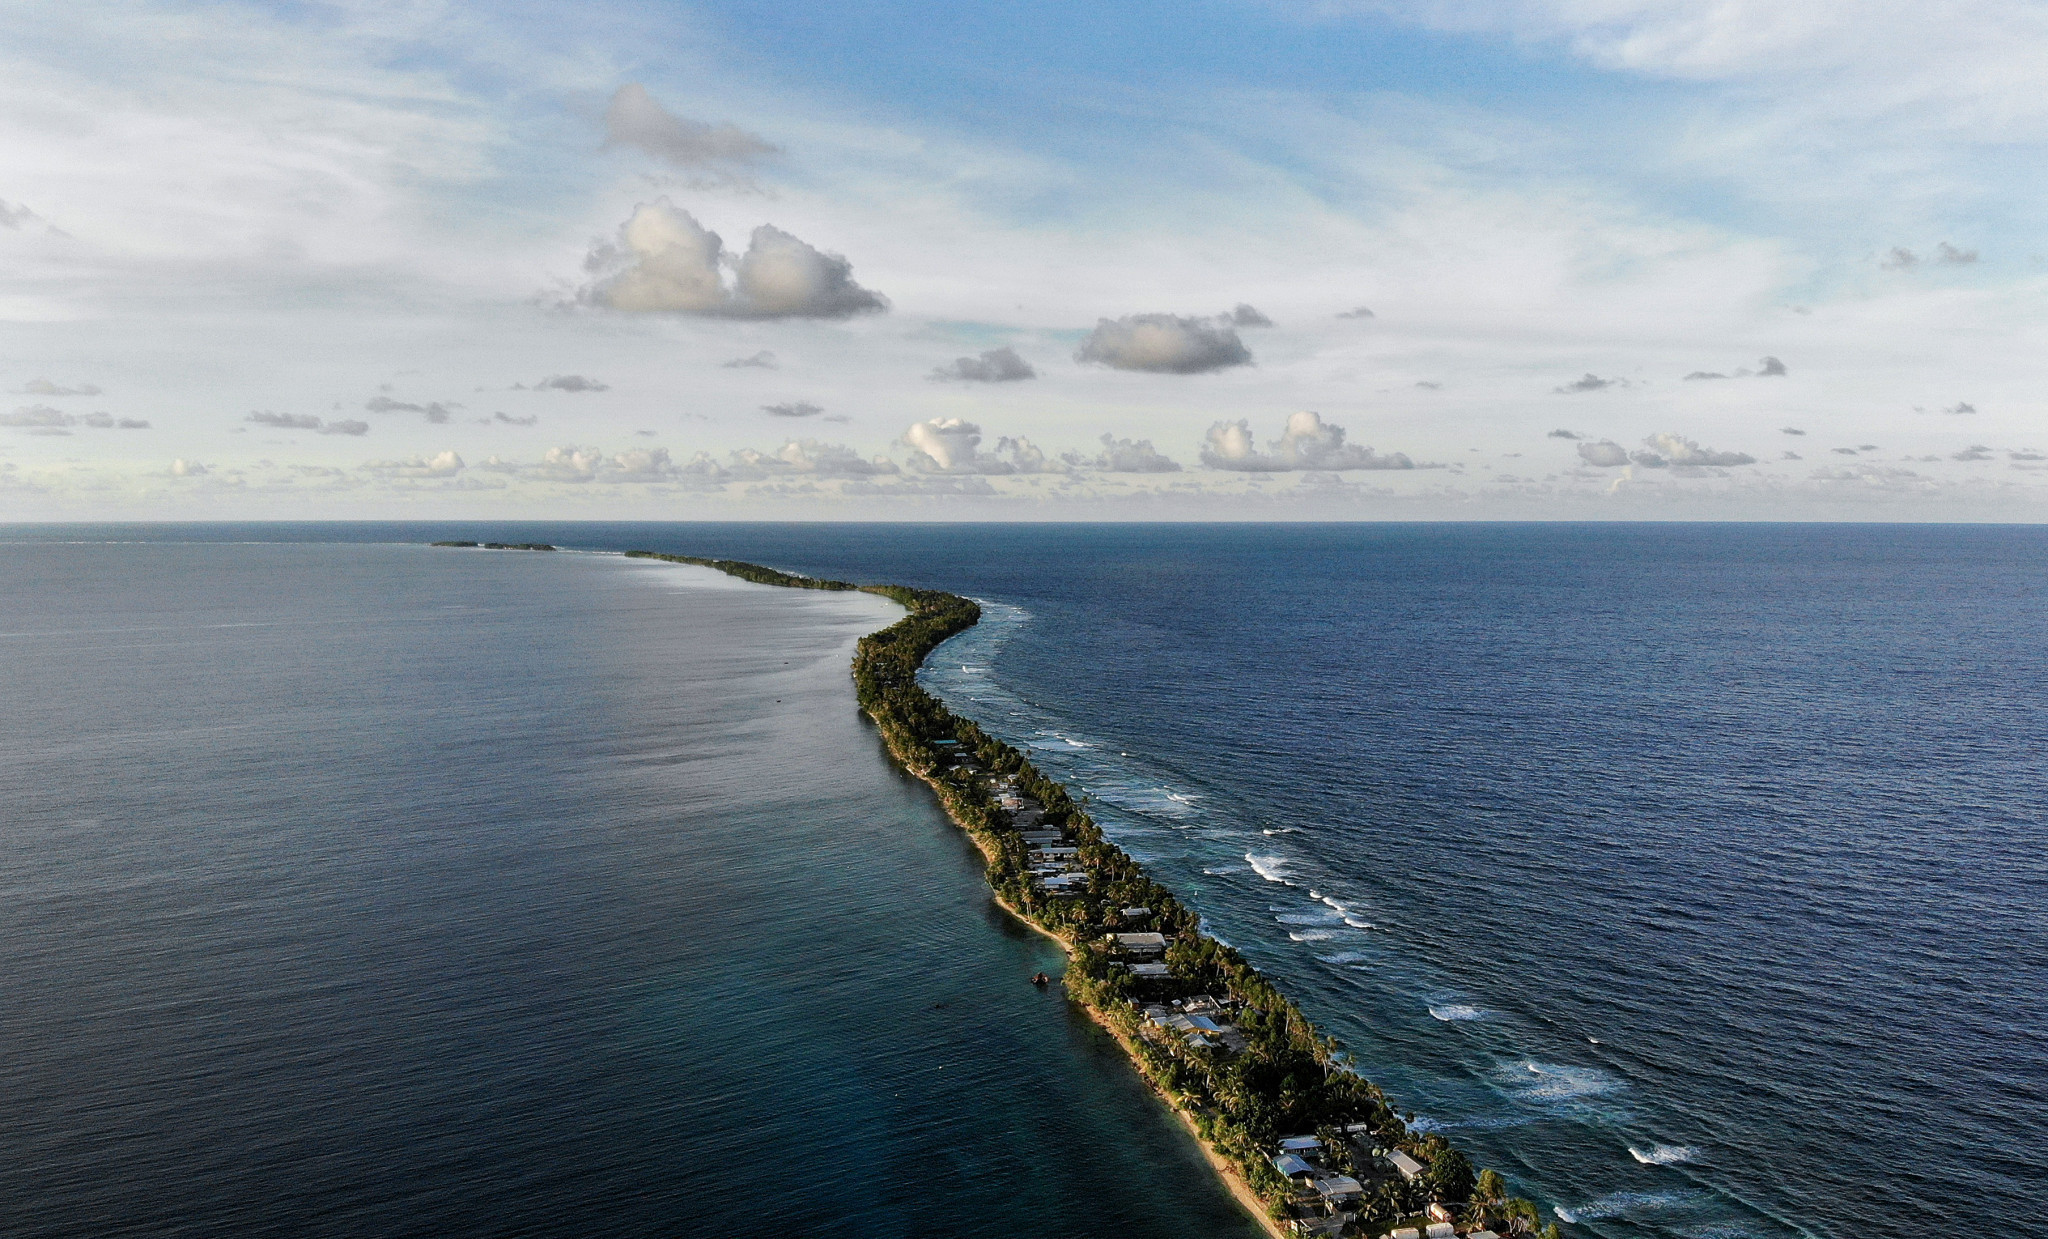 Tuvalu's main island Funafuti is just 20 metres across at its narrowest point ©Getty Images